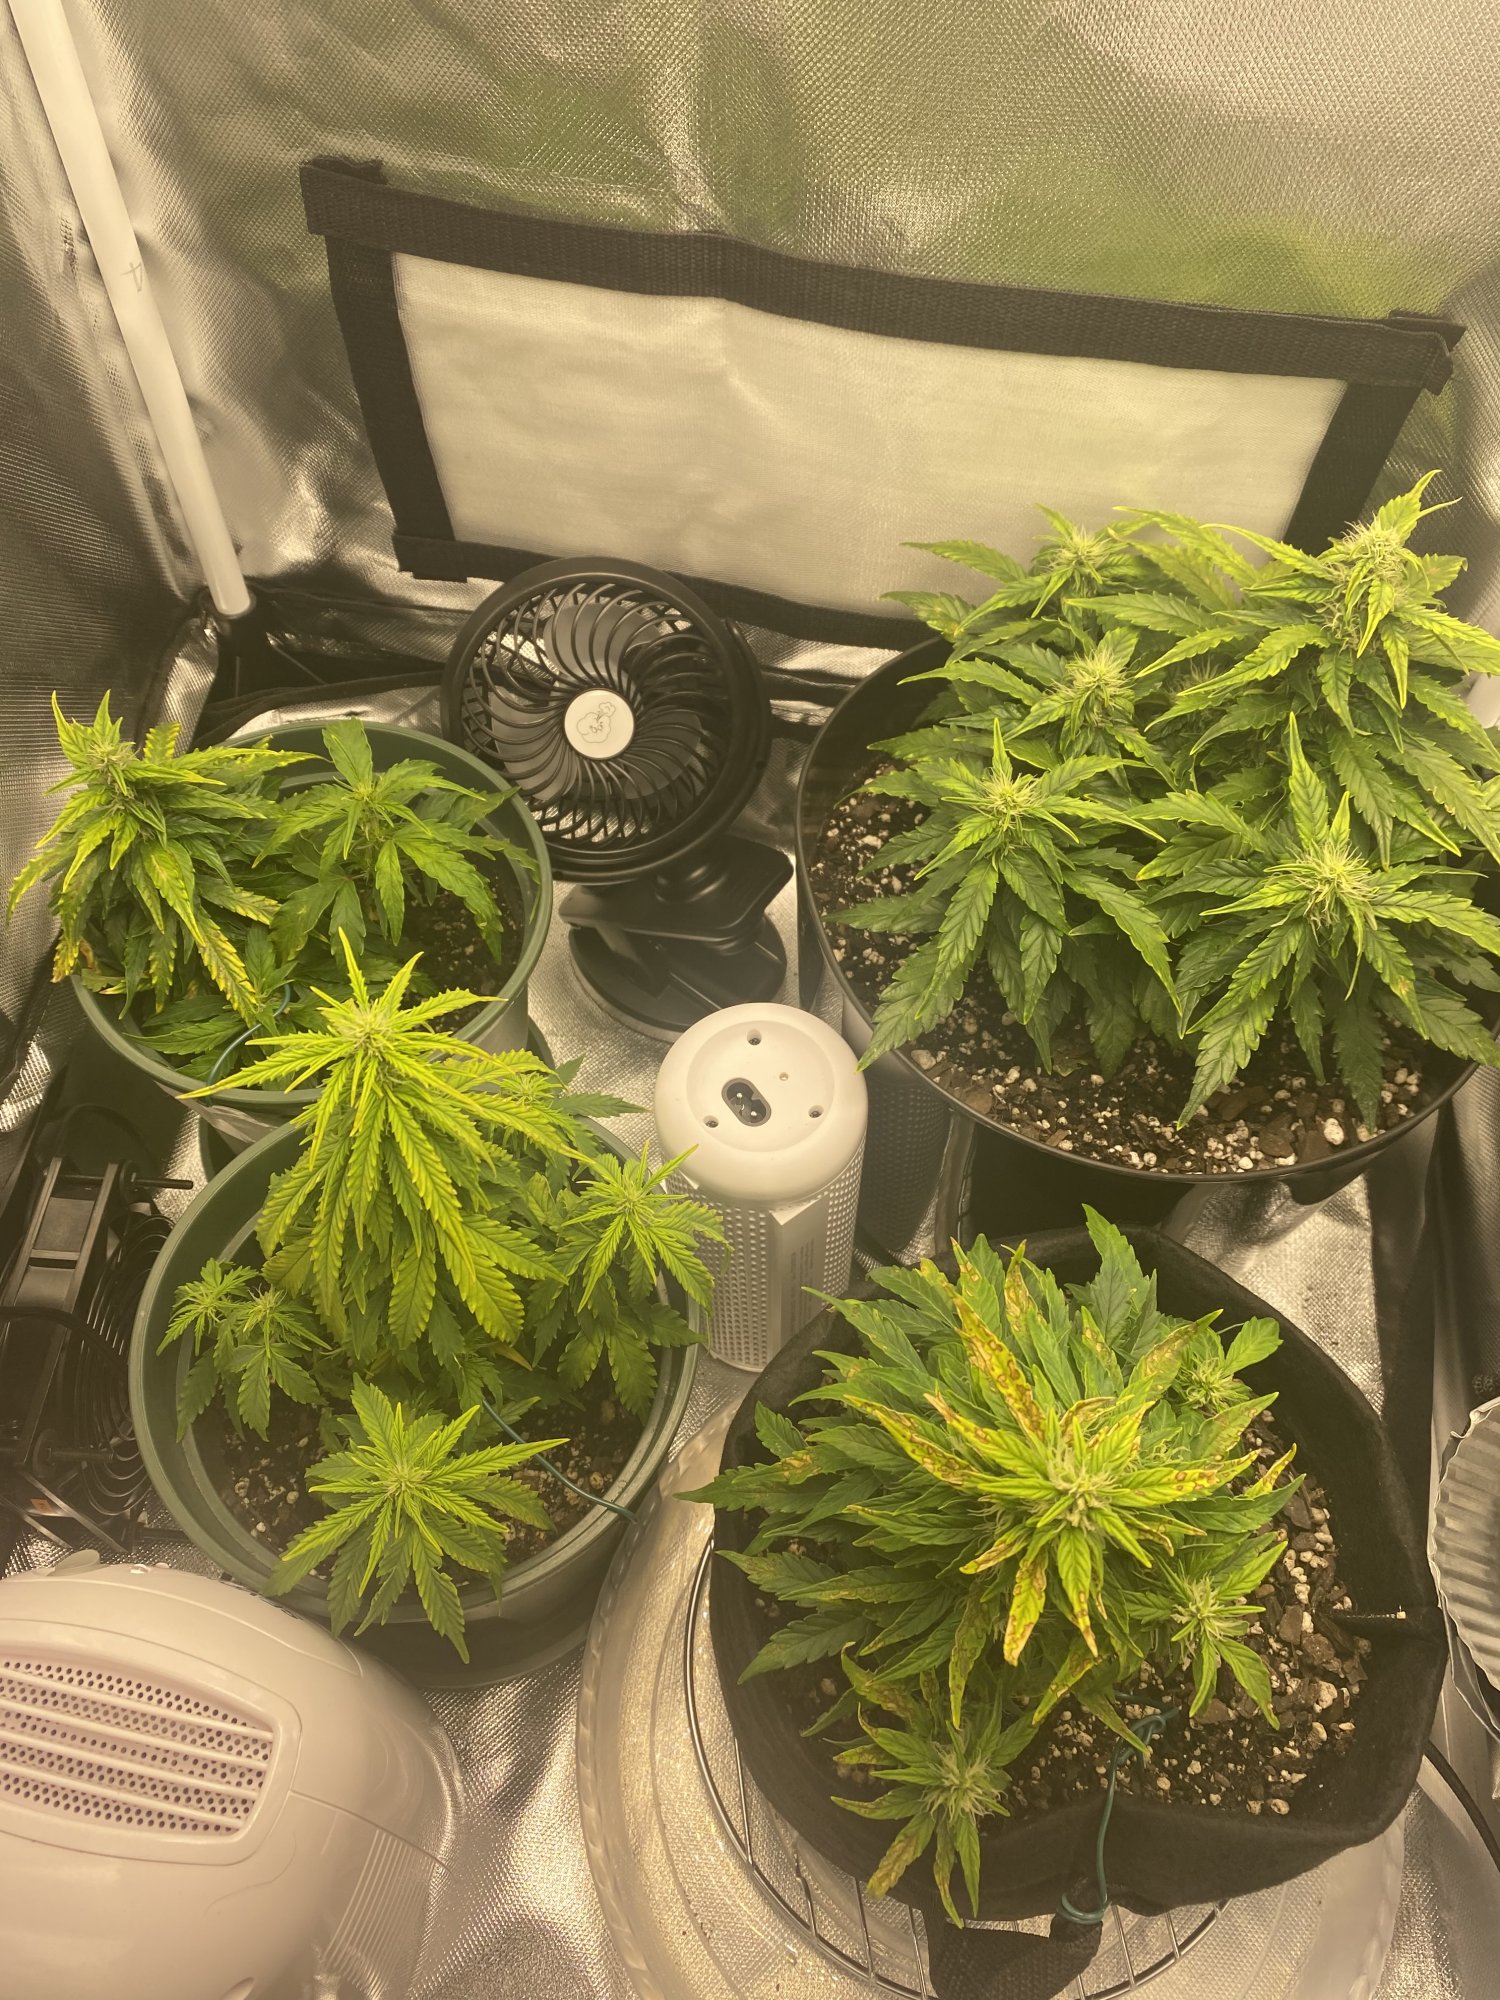 Please help my plants was showing some yellowing and browning a week ago 4